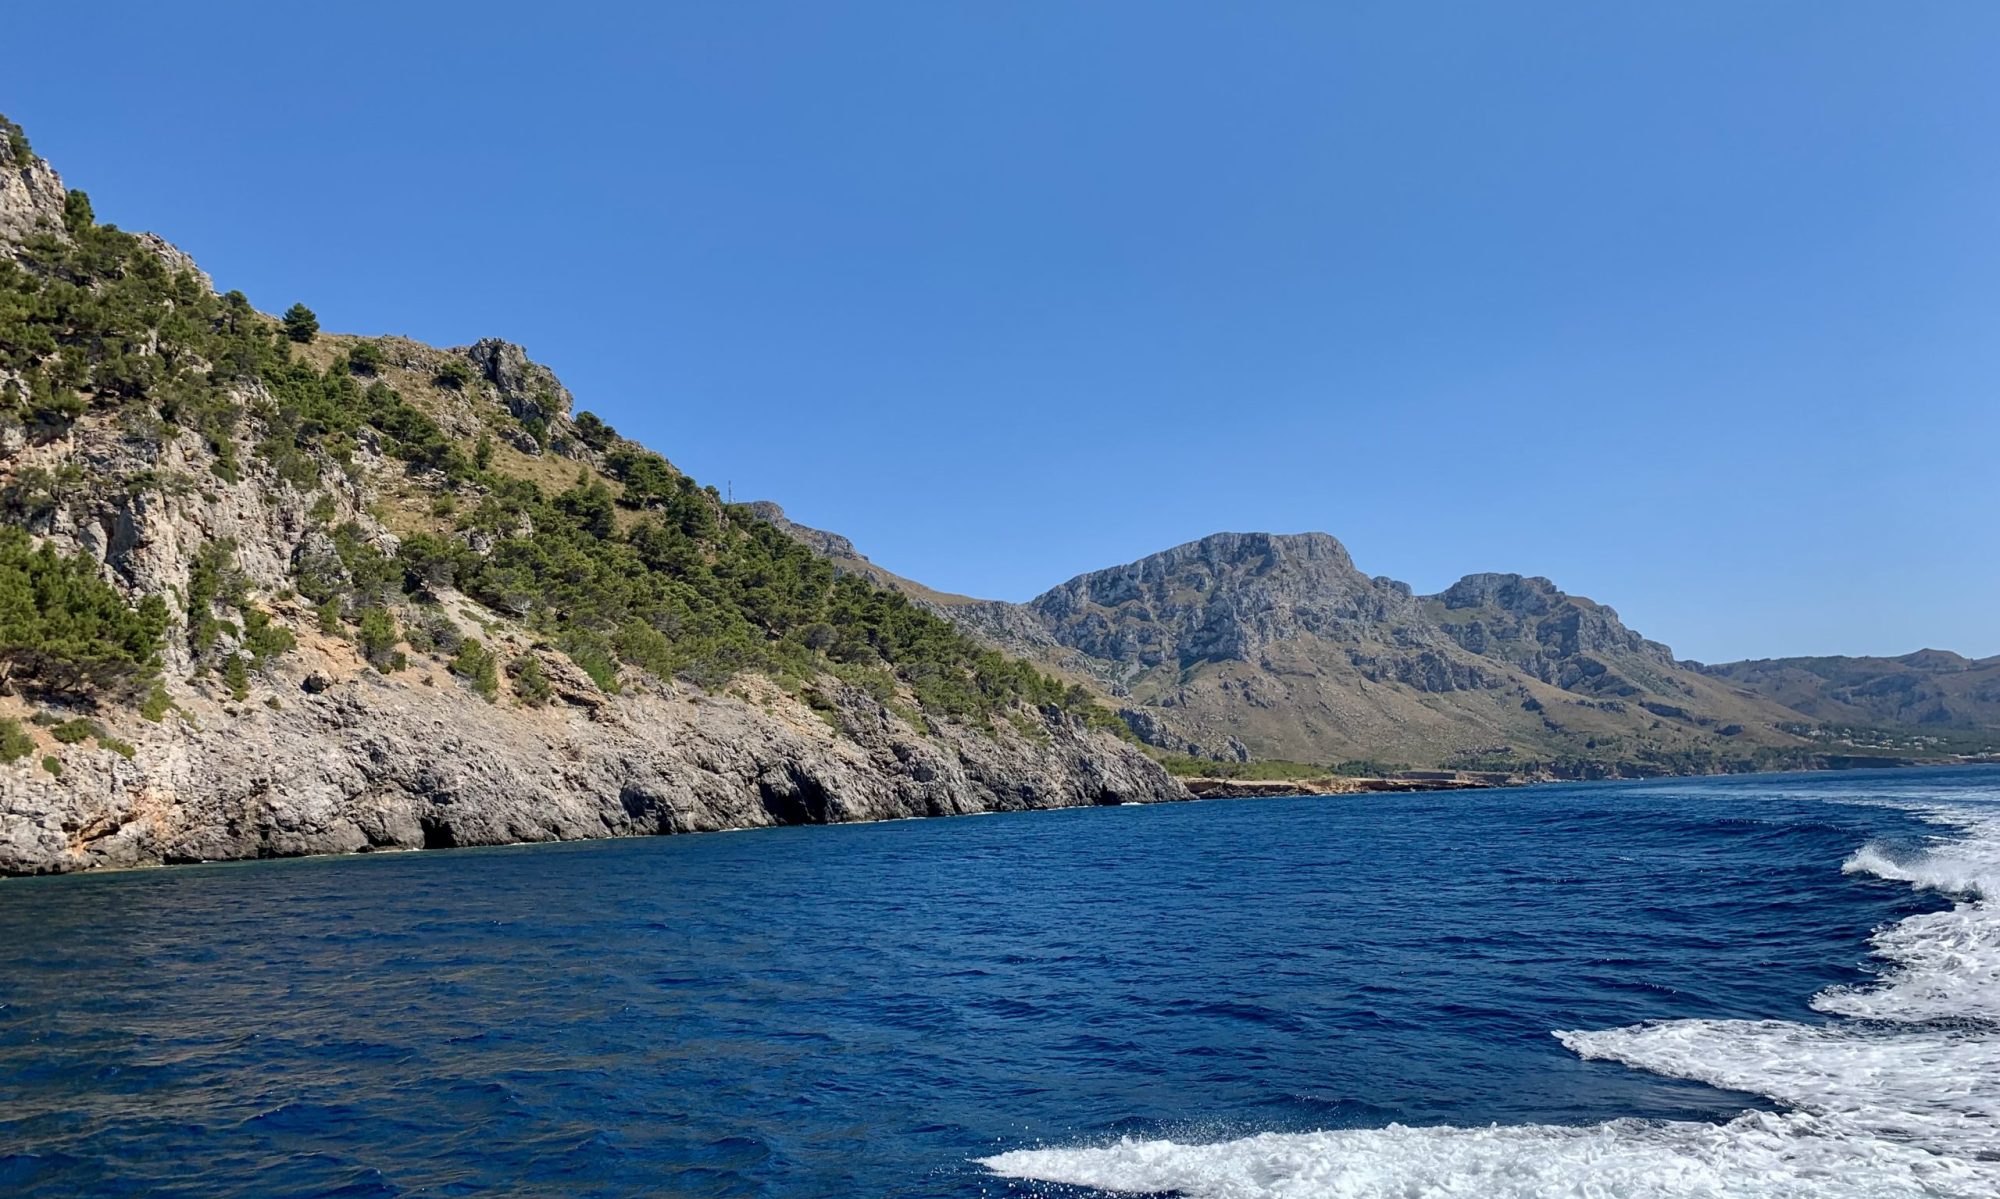 Picture made by Lizzy Vetter, shows the coast of Mallorca - by L.V. Photography - Lizzy.media